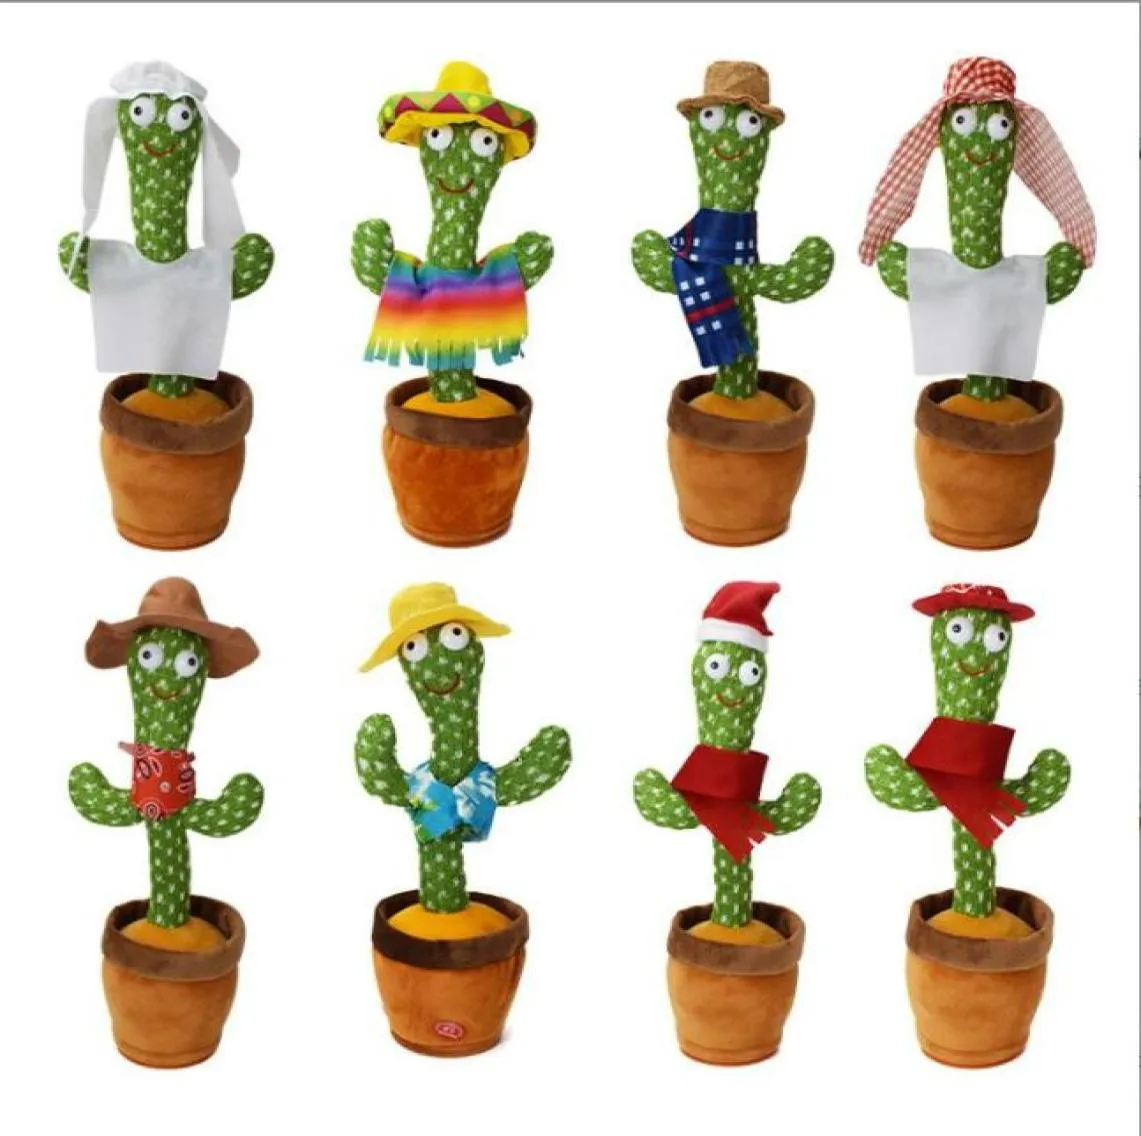 Novelty Games Toys Dancing Talking Singing Cactus Stuffed Plush Toy Electronic with Song Potted Toy For kids and Adu4526212